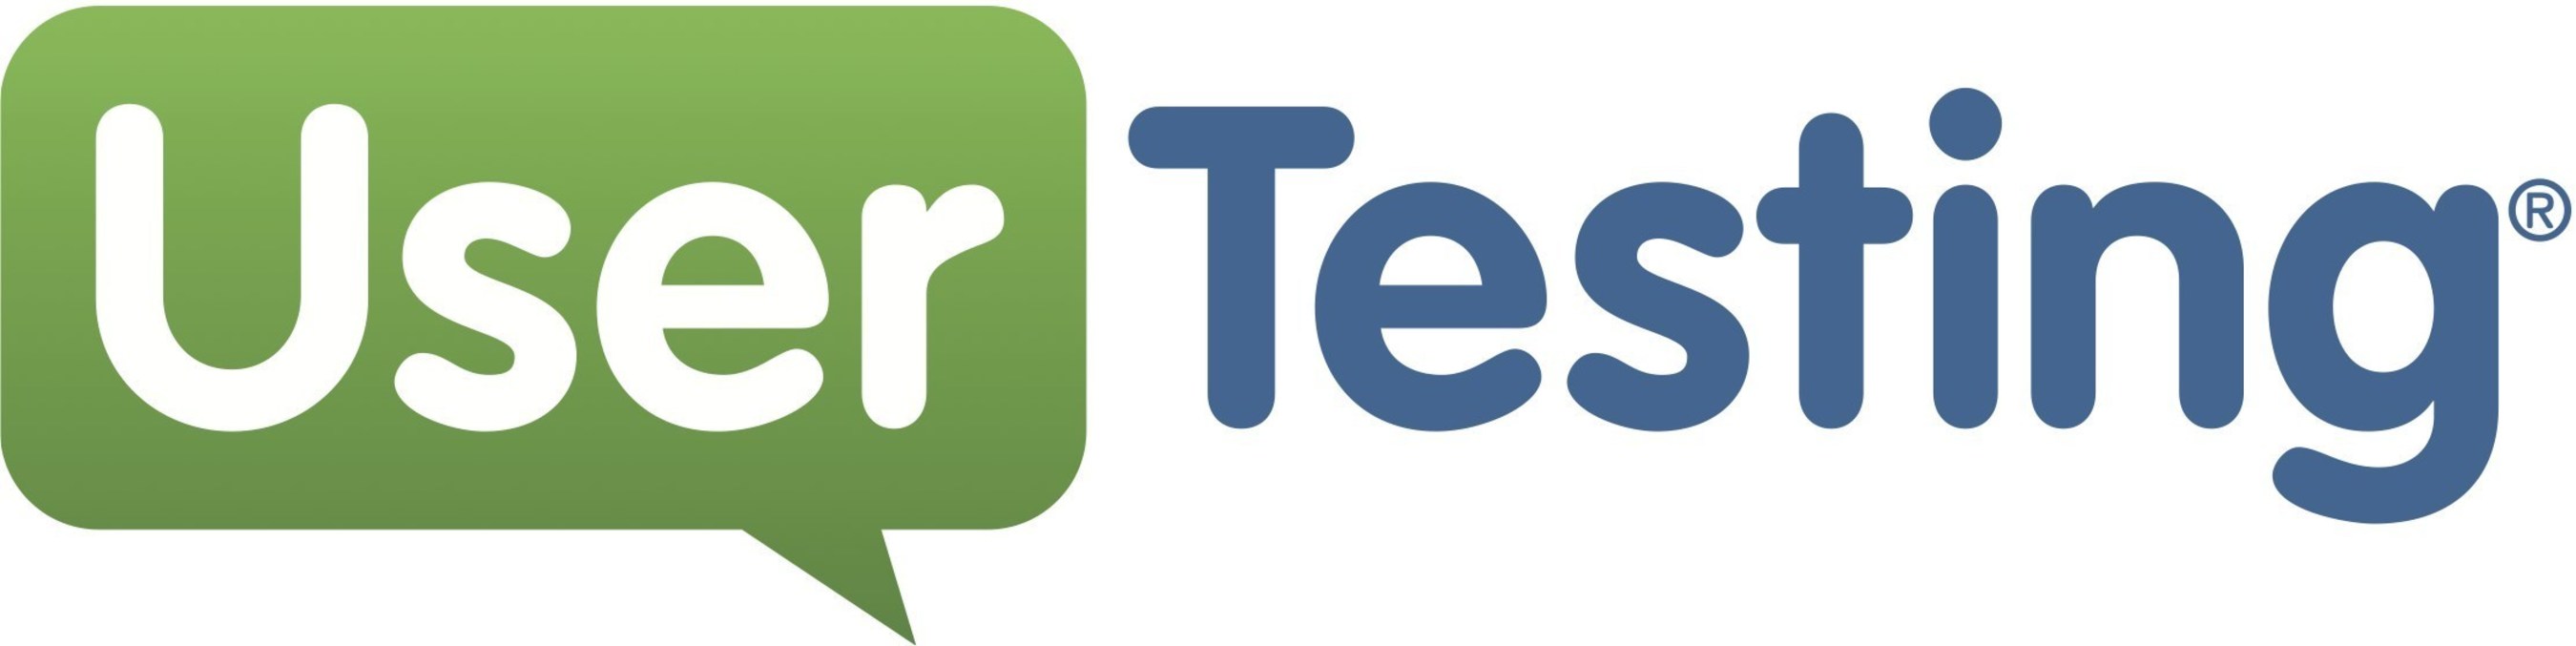 UserTesting is the world's leading user experience platform